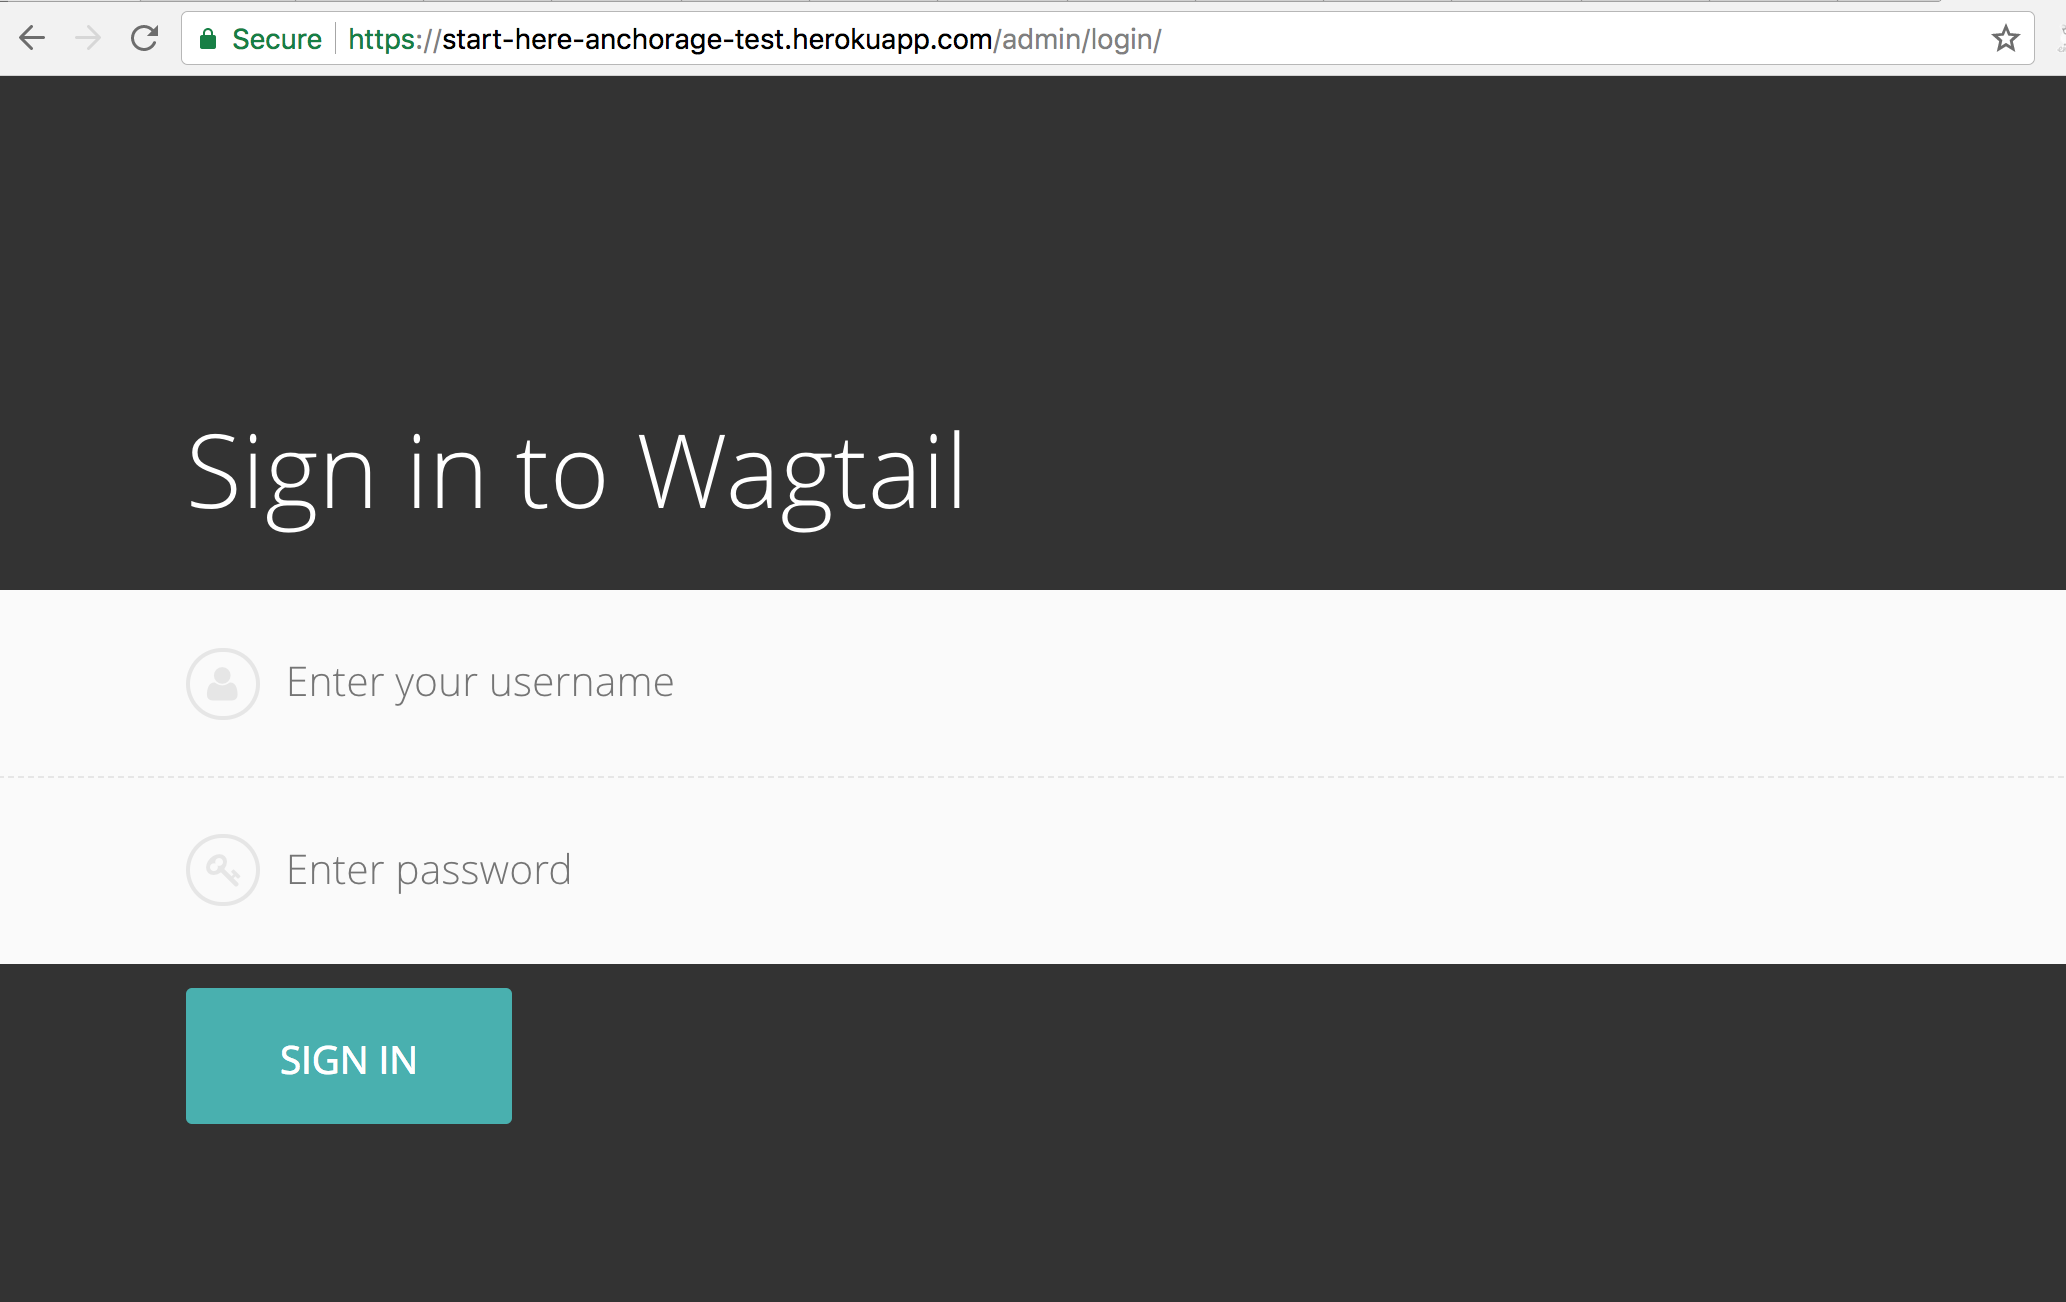 The login view for the Wagtail admin